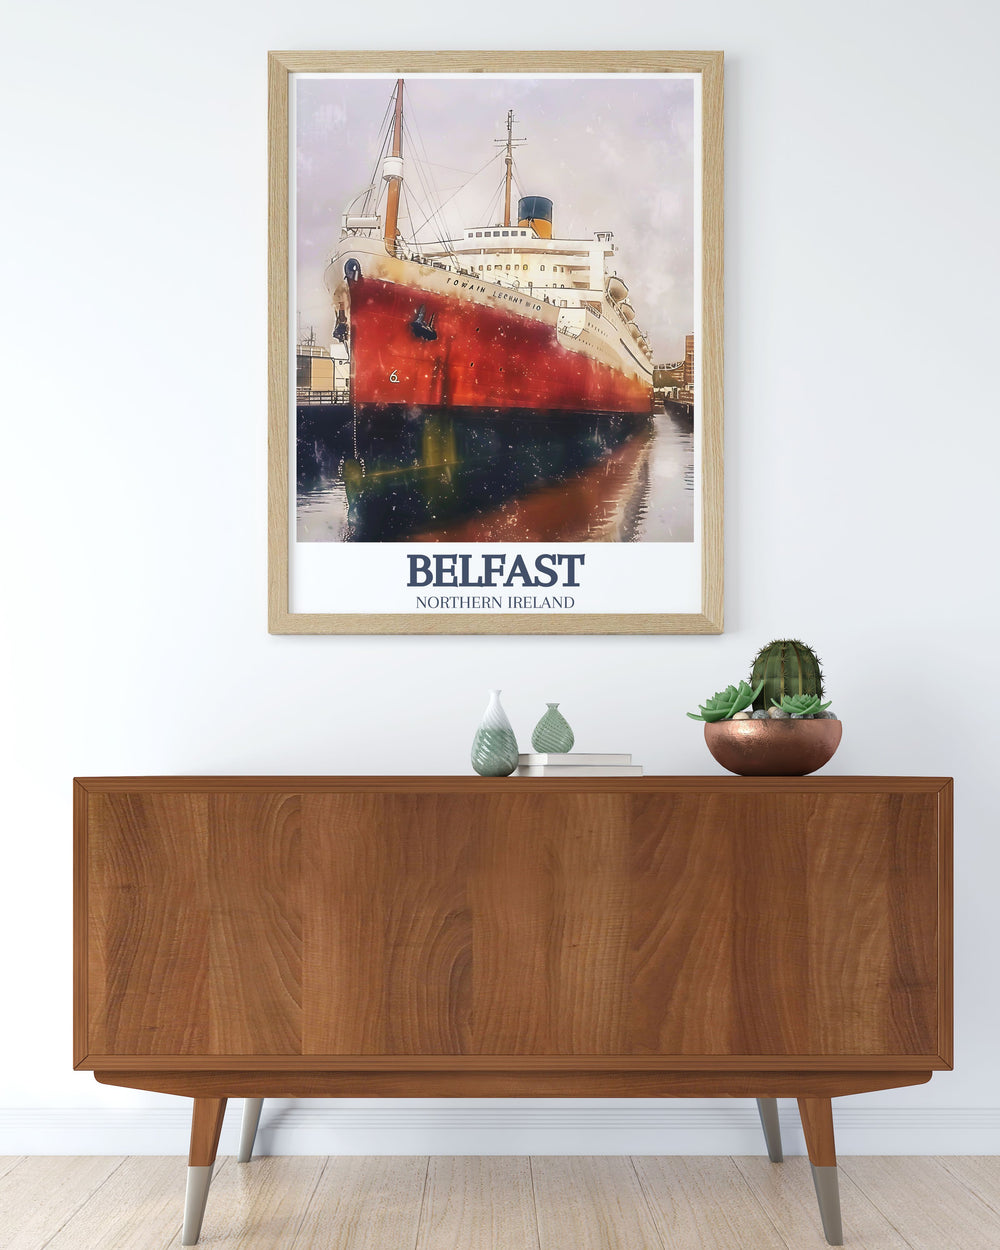 Stunning Titanic Belfast SS Nomadic artwork capturing the grandeur of Belfasts maritime history. Ideal as a Belfast wall poster or Ireland poster, bringing a piece of UK wall art into your home for a stylish and cultural touch.